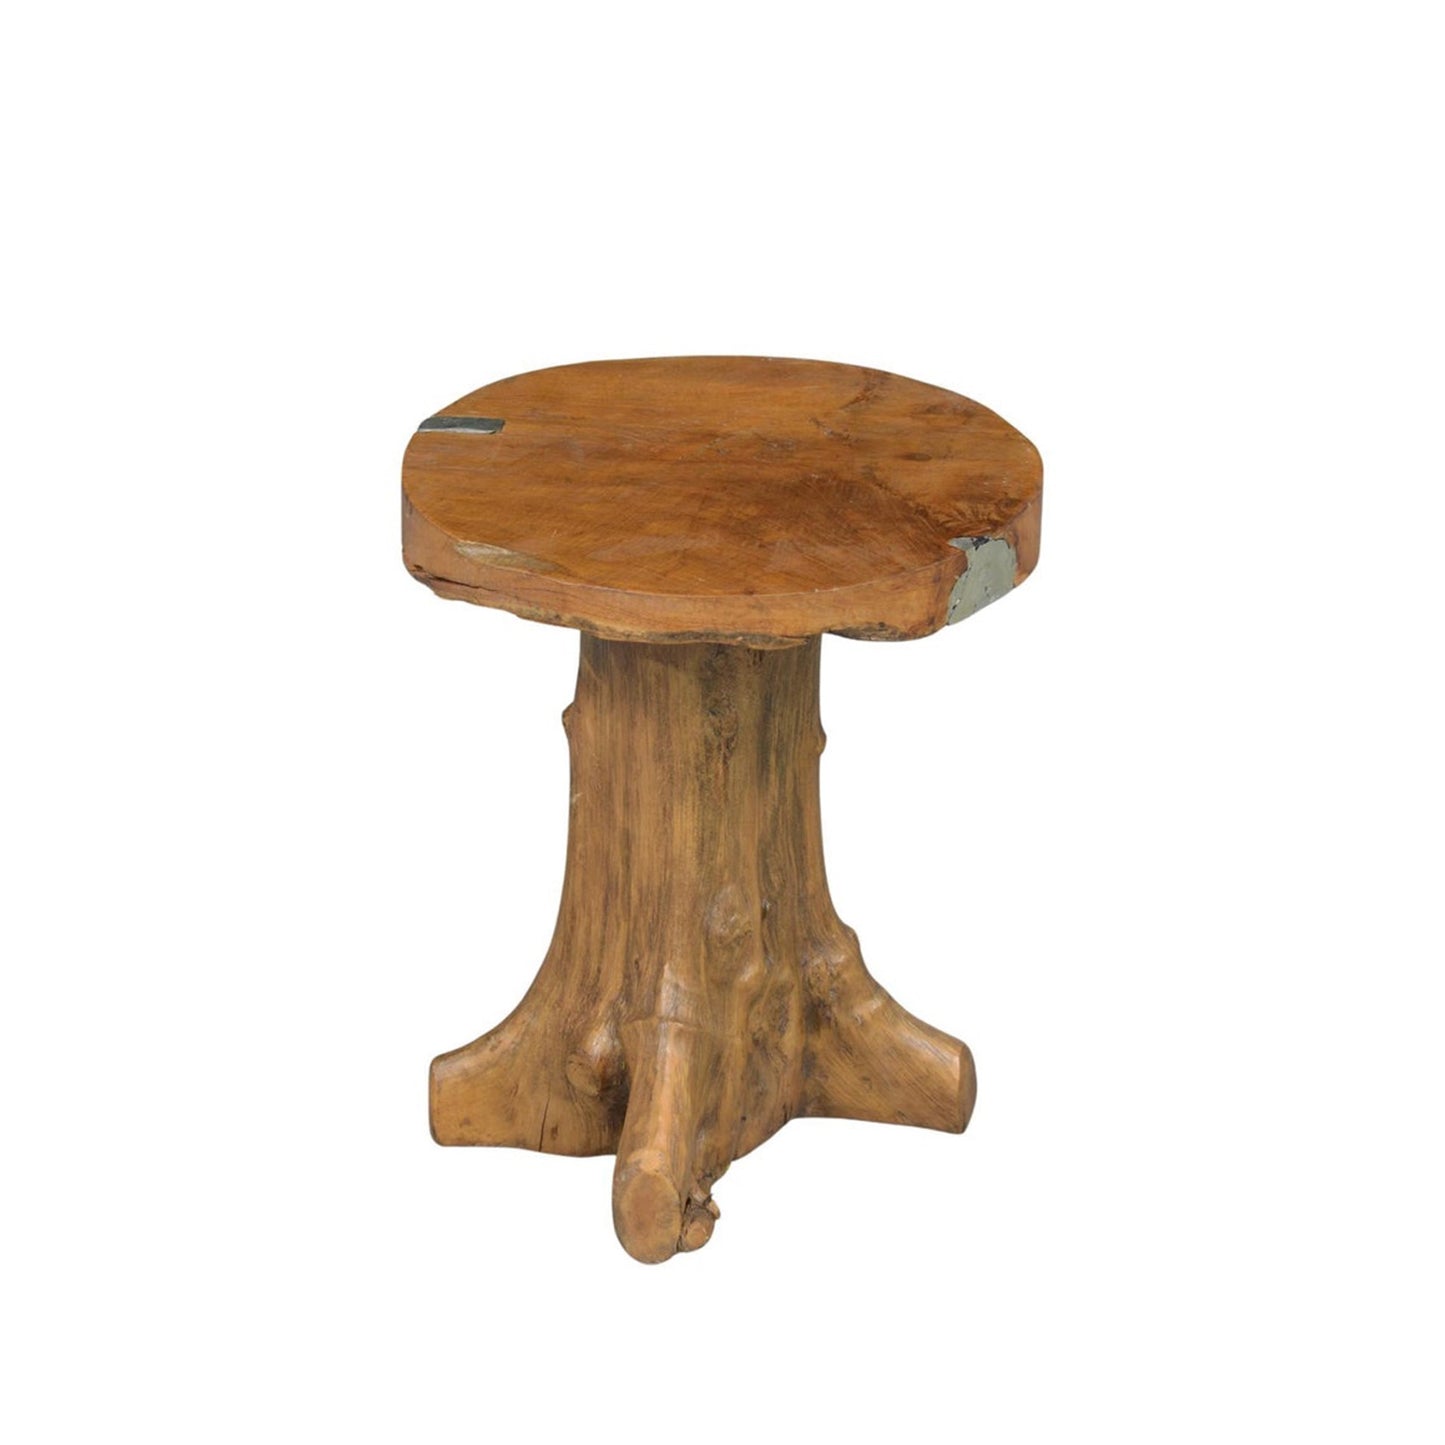 Organic Modern Natural Color Modern Root Side Table